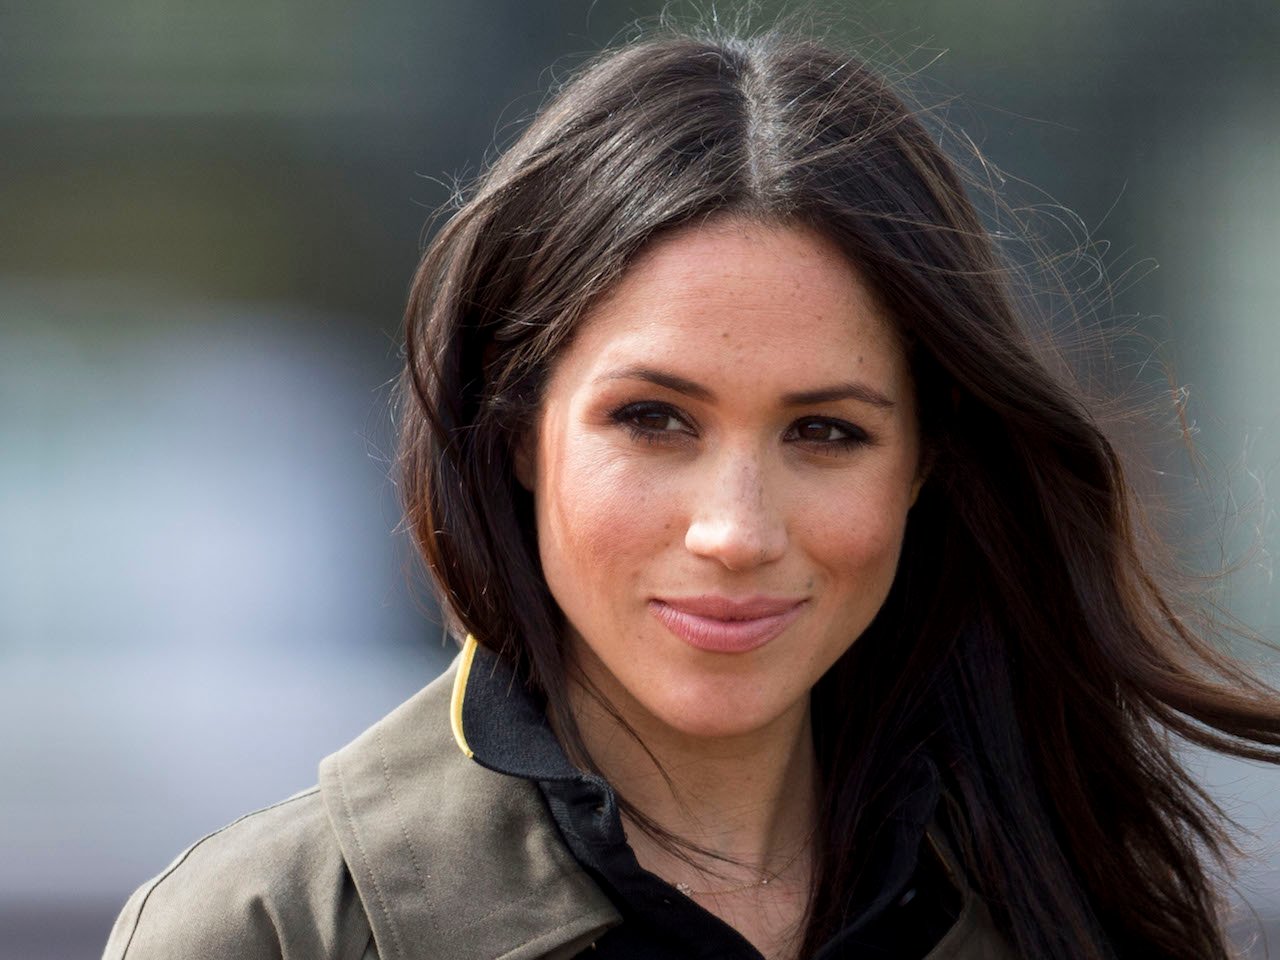 Meghan Markle shown Team Trials for the Invictus Games